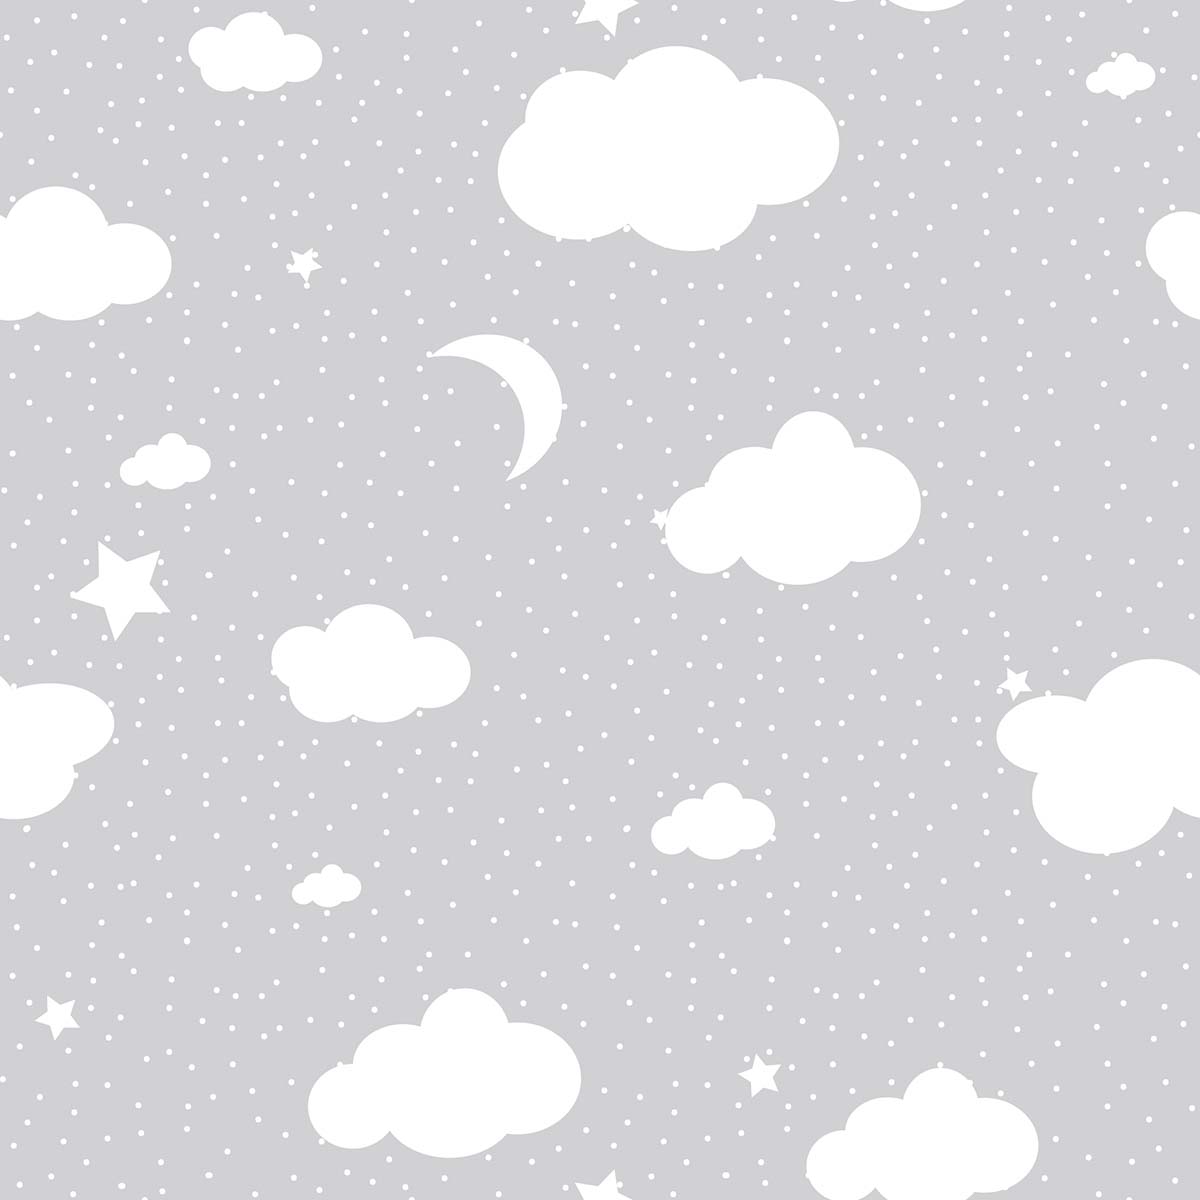 A grey and white background with clouds and stars